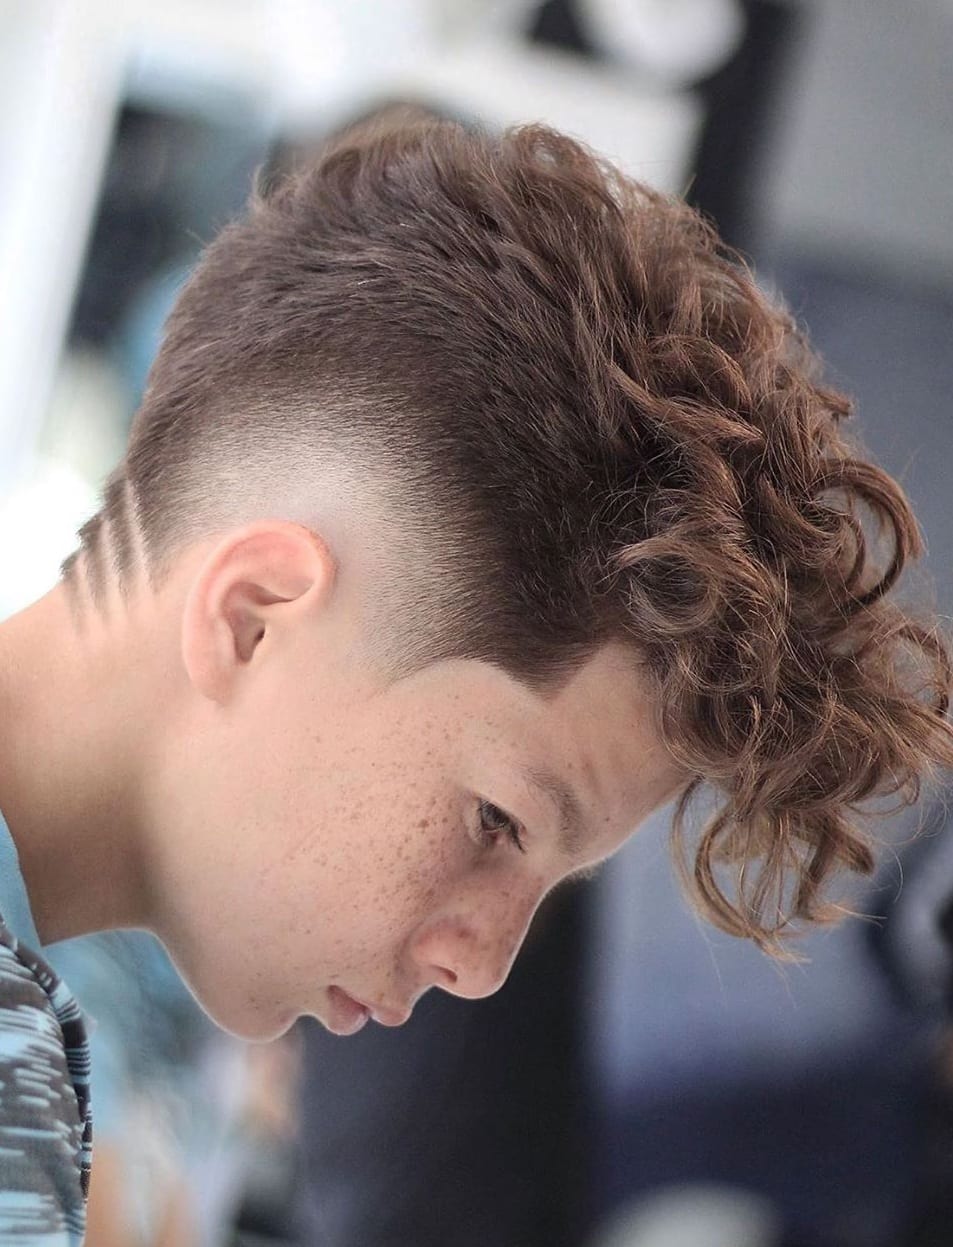 Curly Hair Mohawk and Fade kids Haircut for boys